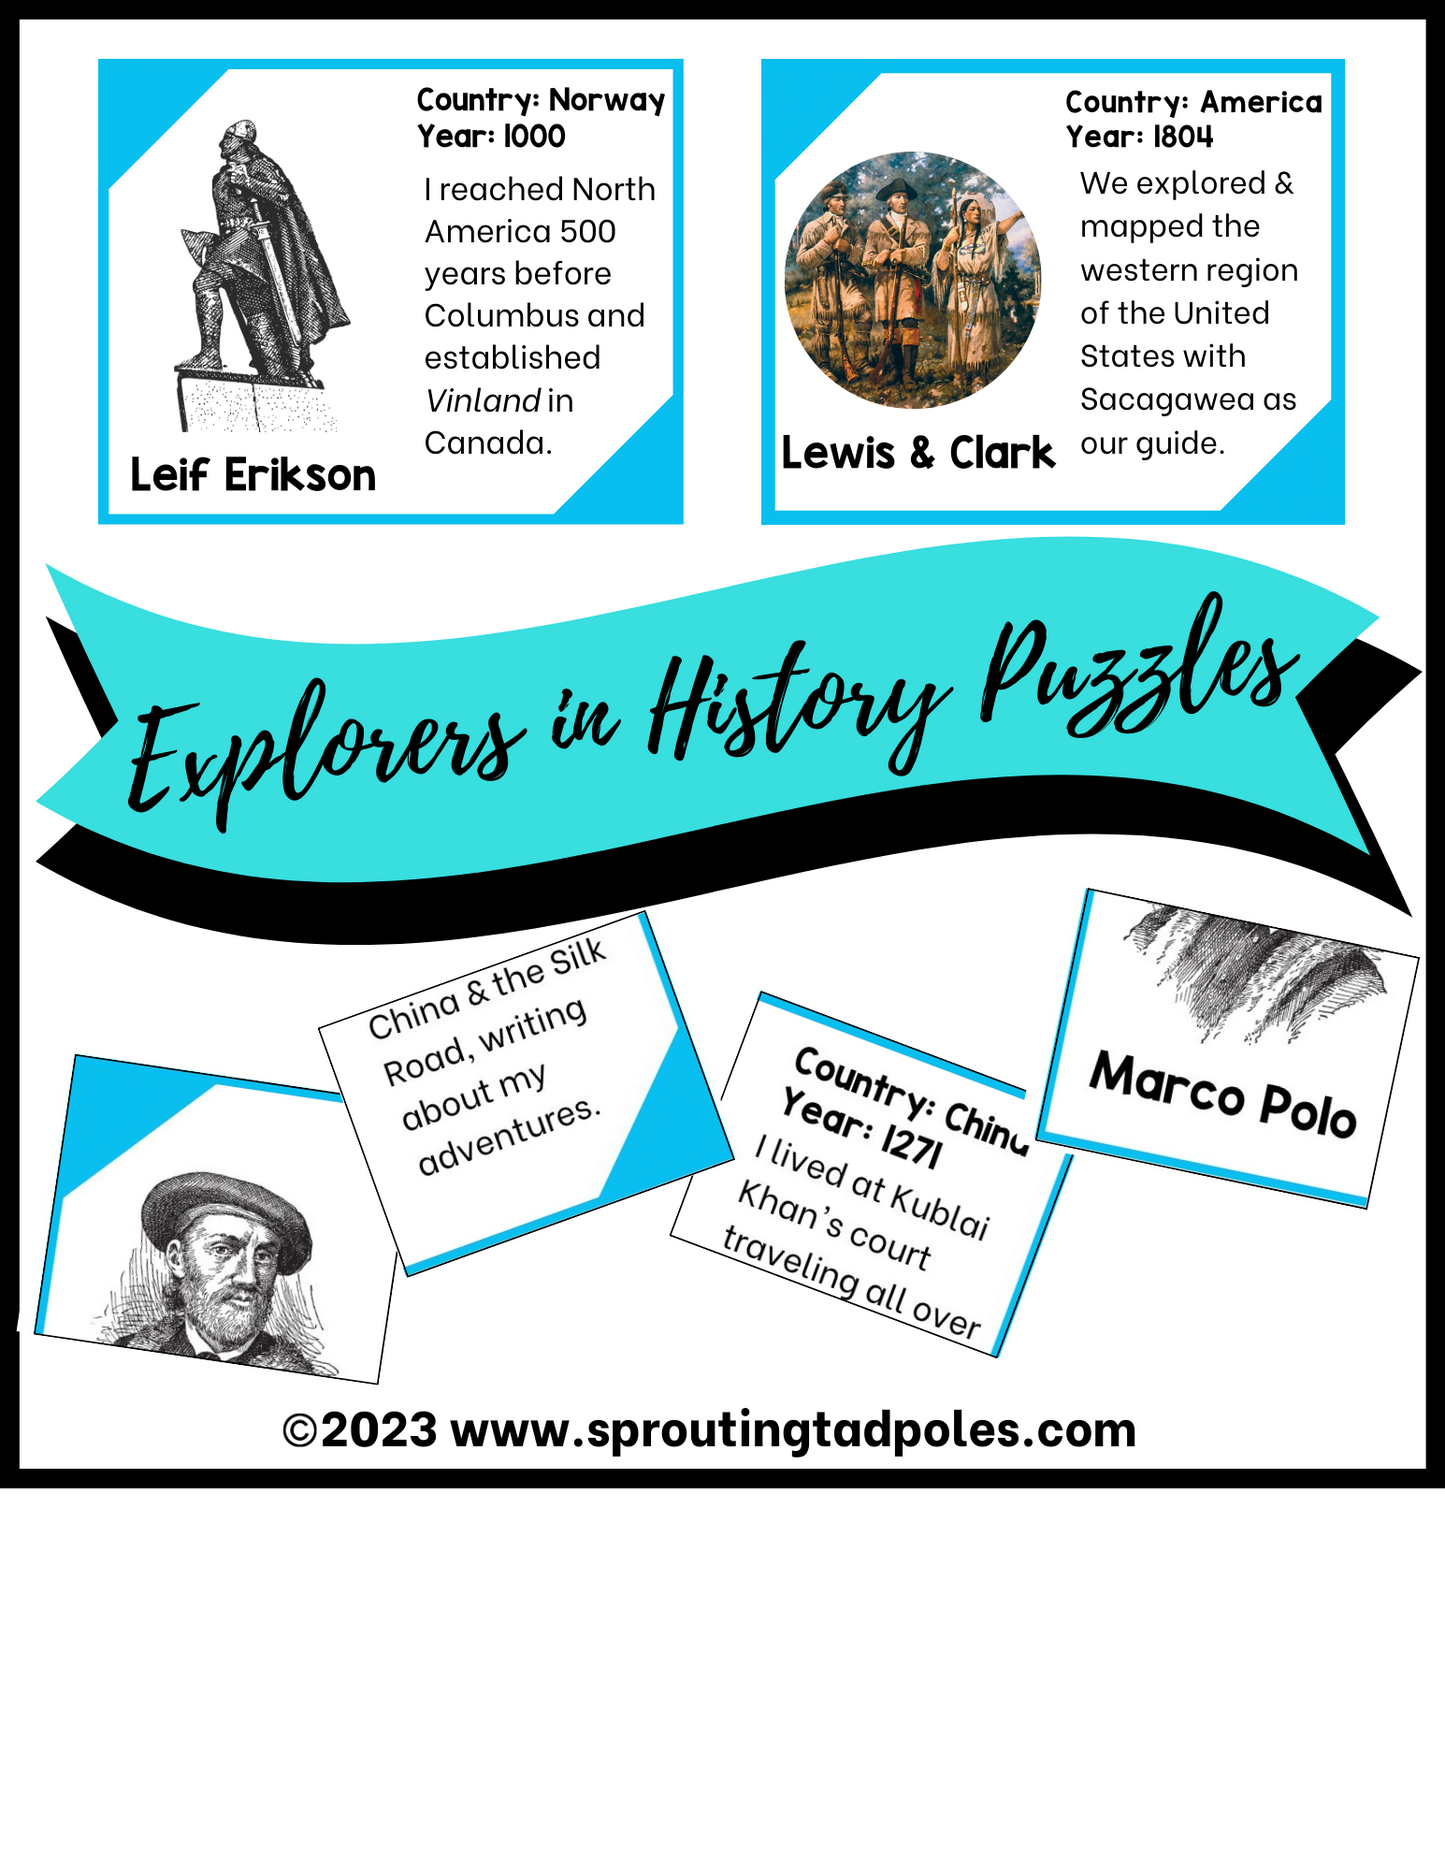 Greatest Explorers In History Puzzles